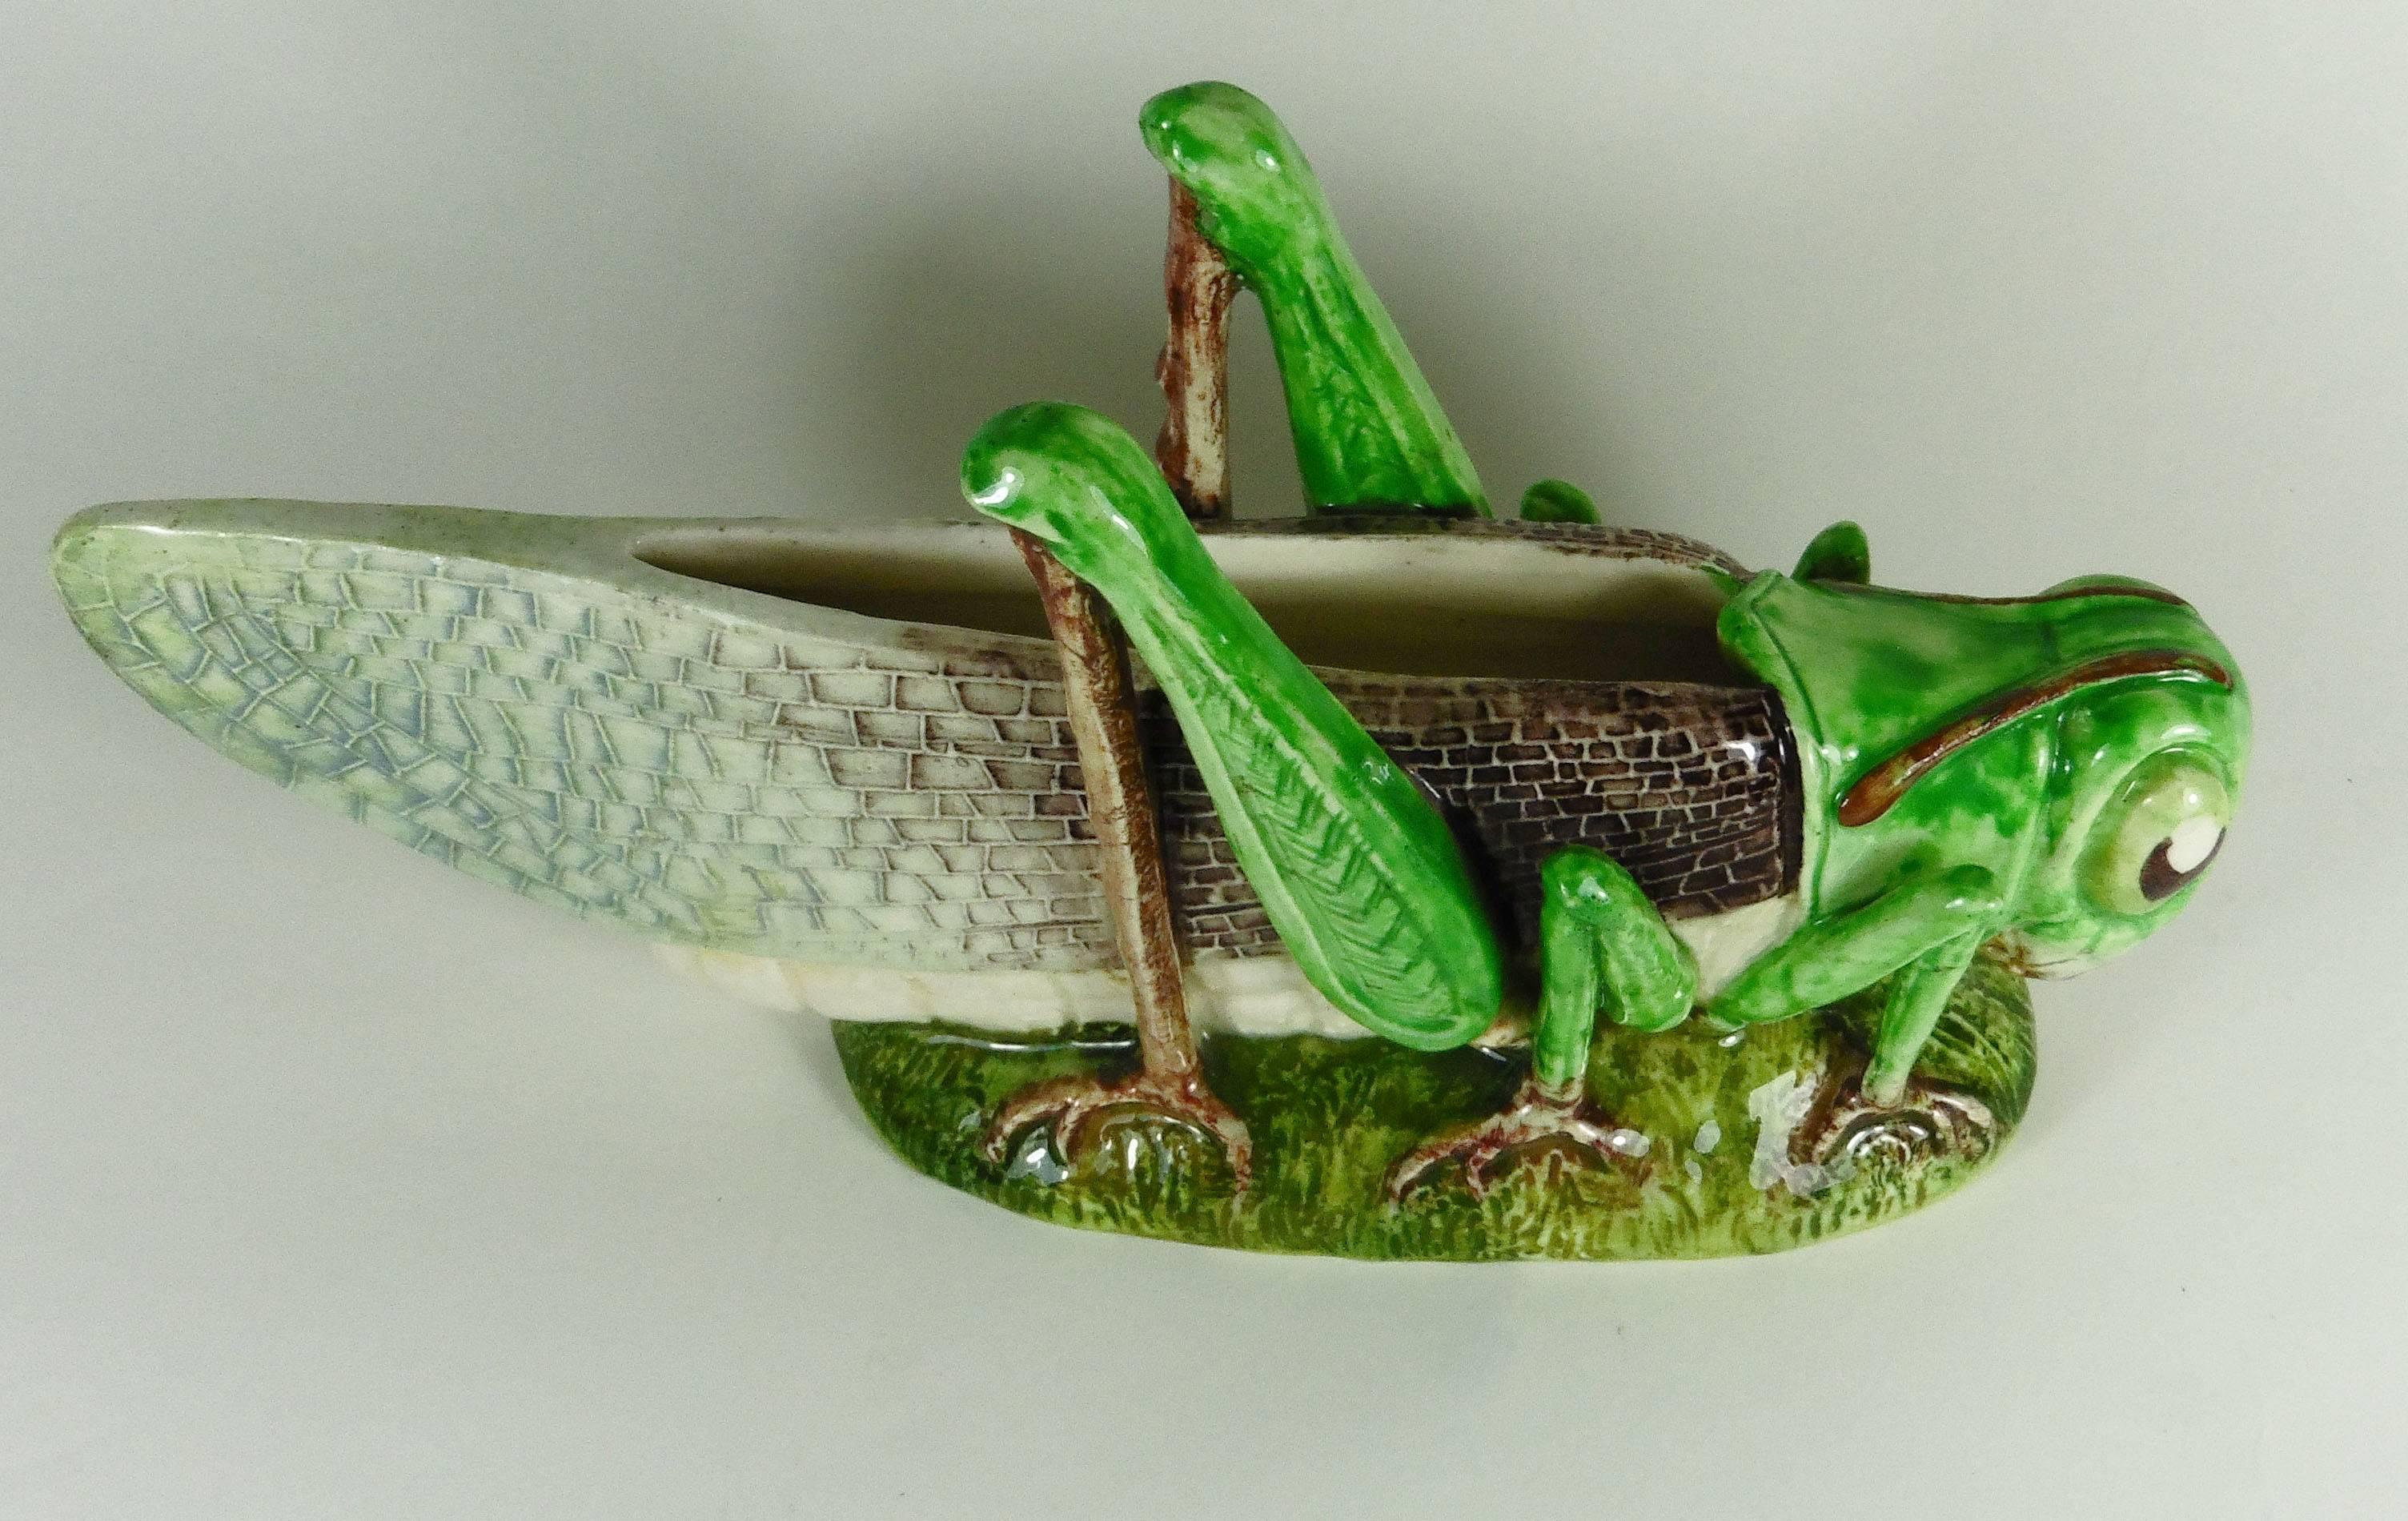 Rare Majolica grasshopper jardinière attributed to Massier, circa 1890.
This grasshopper is a medium size.
At the end of 19th century The Massier manufacture participated at the Universal Exhibitions and earned several prices. This piece is a good